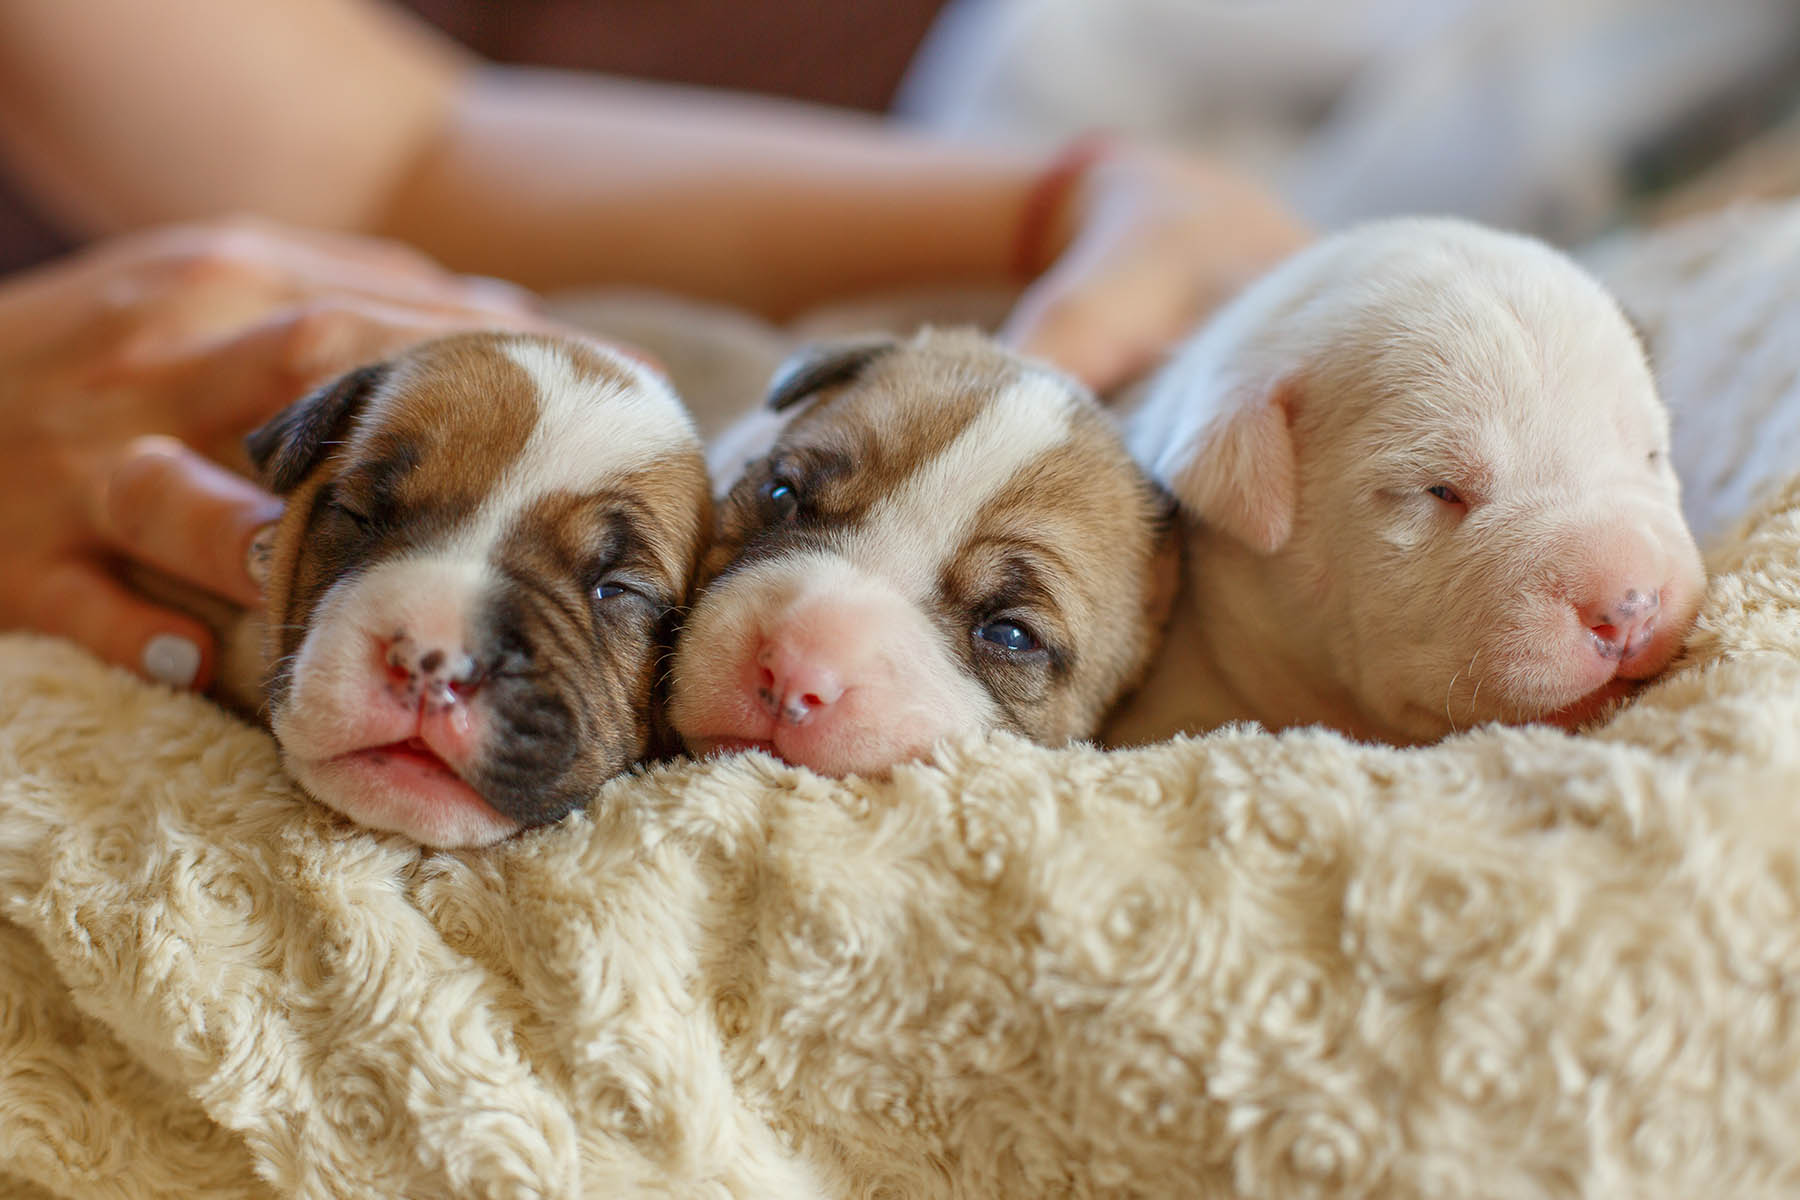 Caring for Newborn Puppies